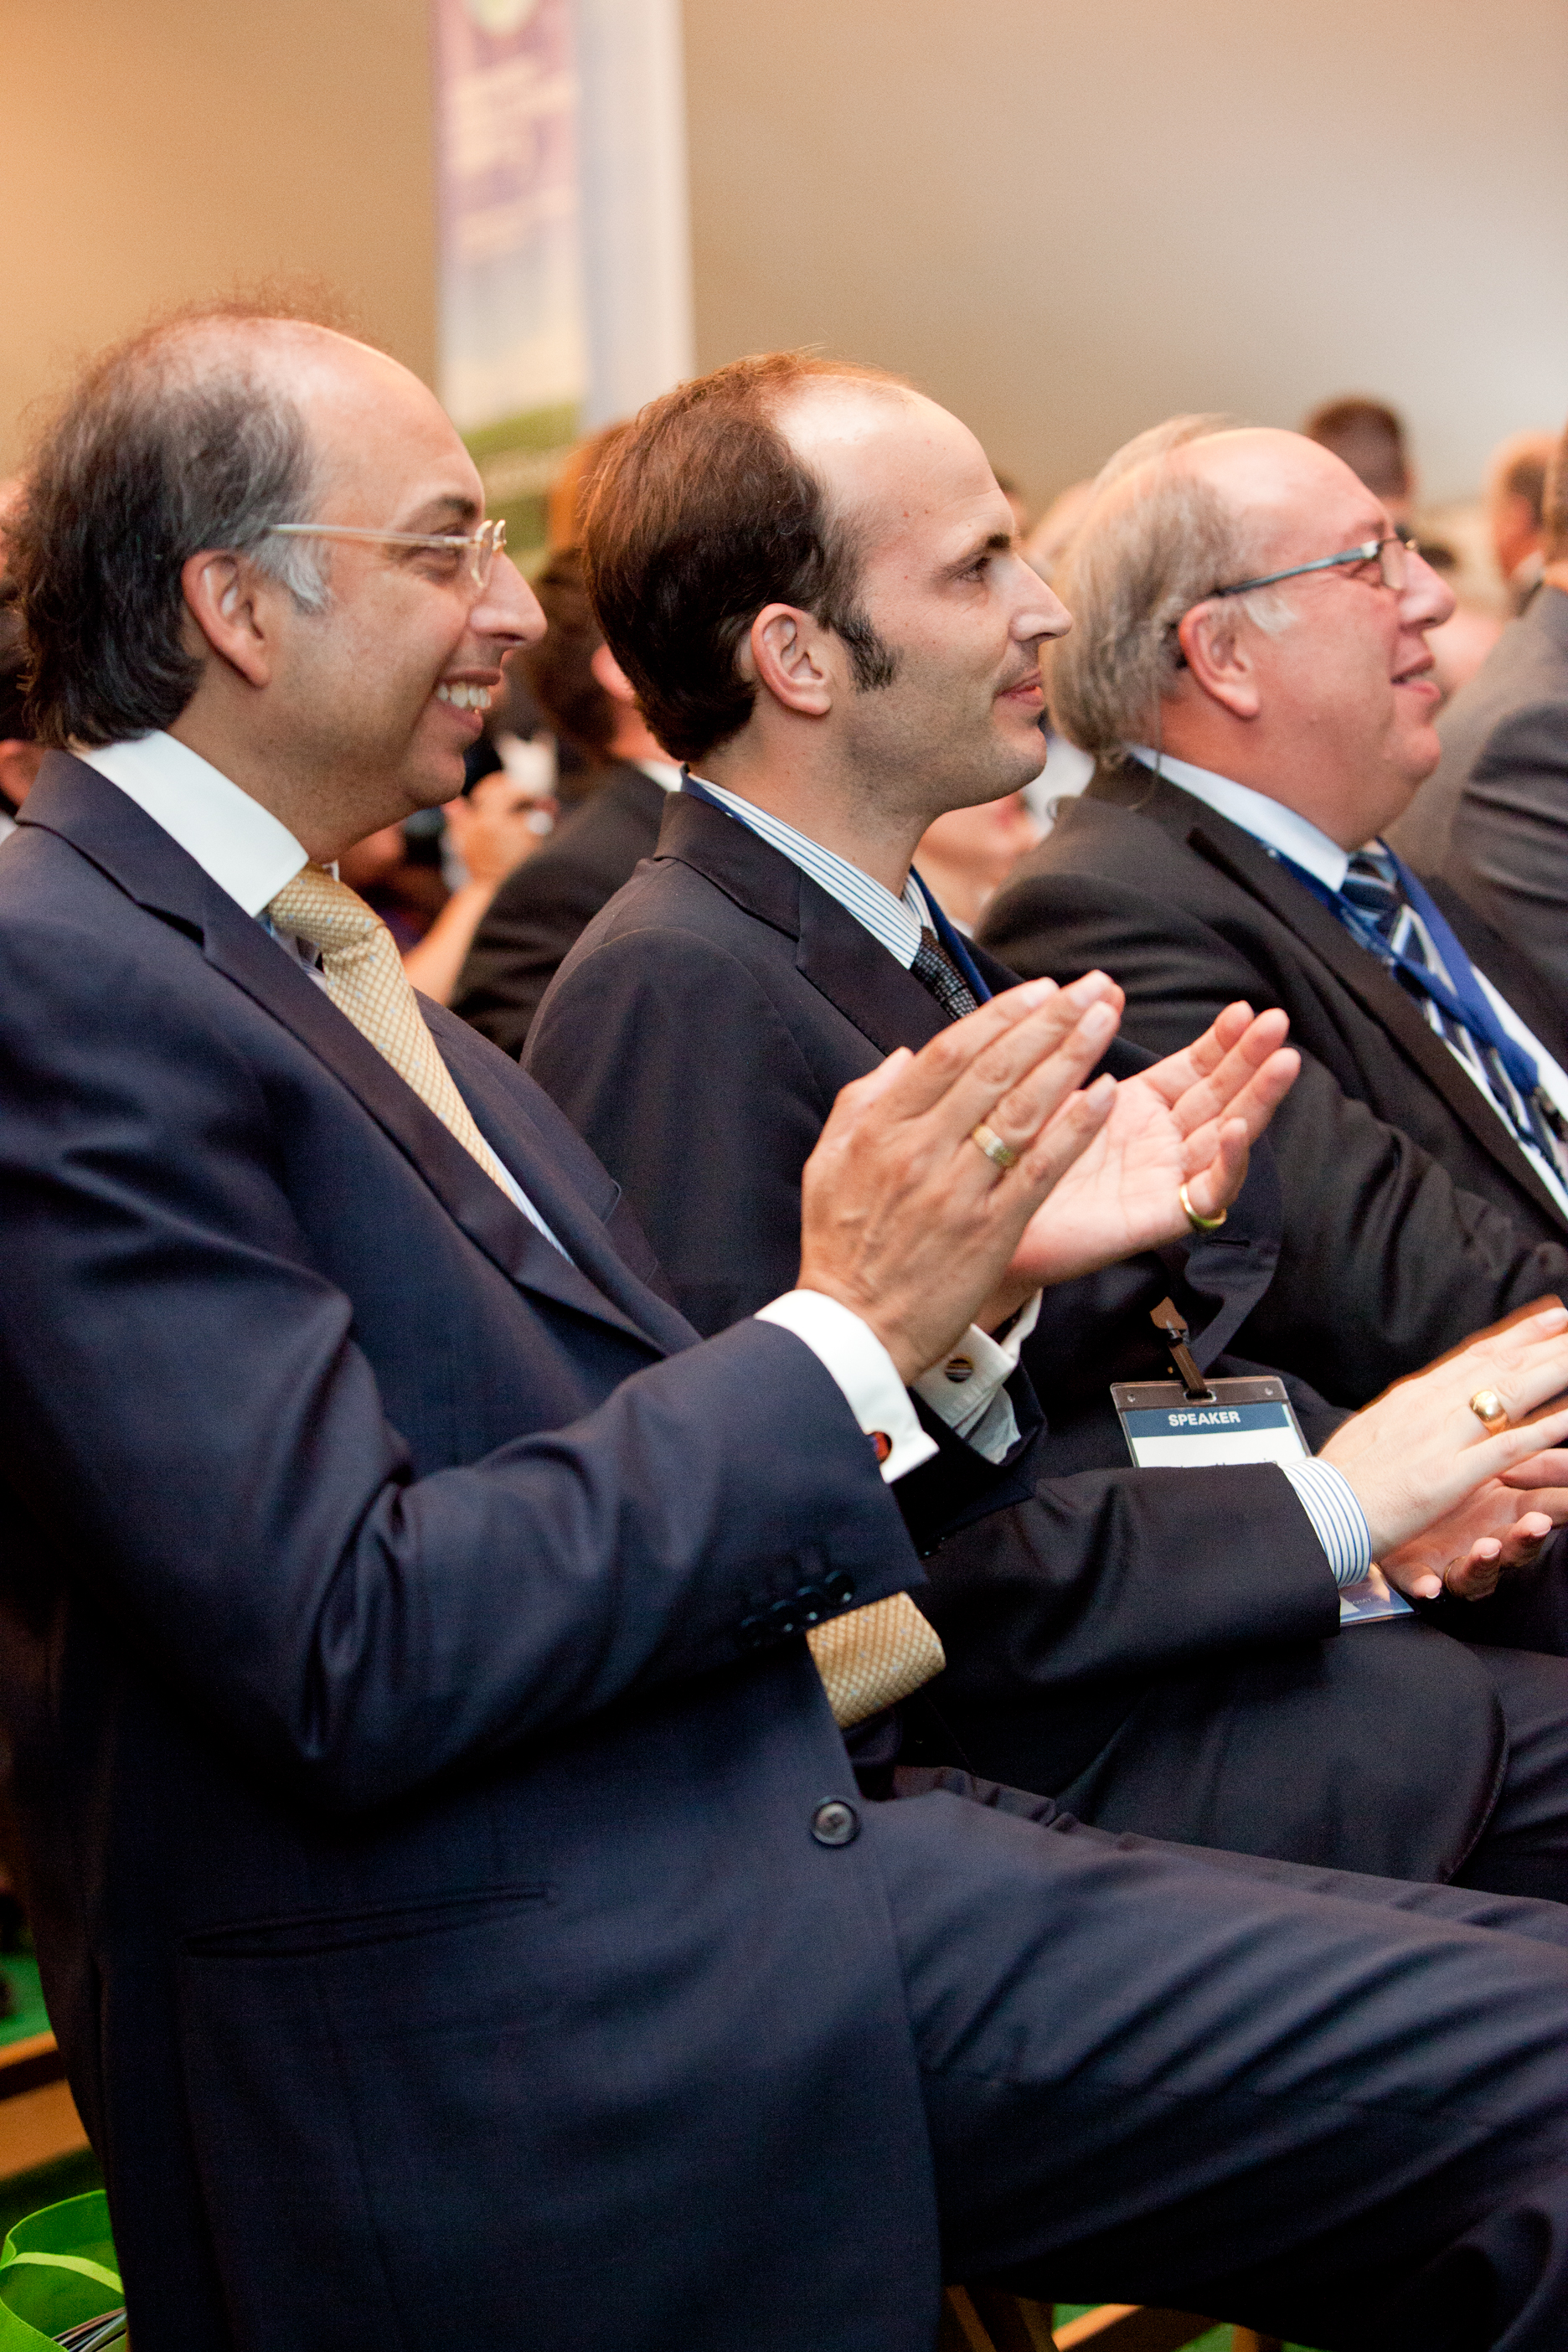 Prince Hussain and Ismaili Council President Mahmoud Eboo applaud during a presentation at the Governors’ Global Climate Summit 3 plenary session. Photo: Farhez Rayani